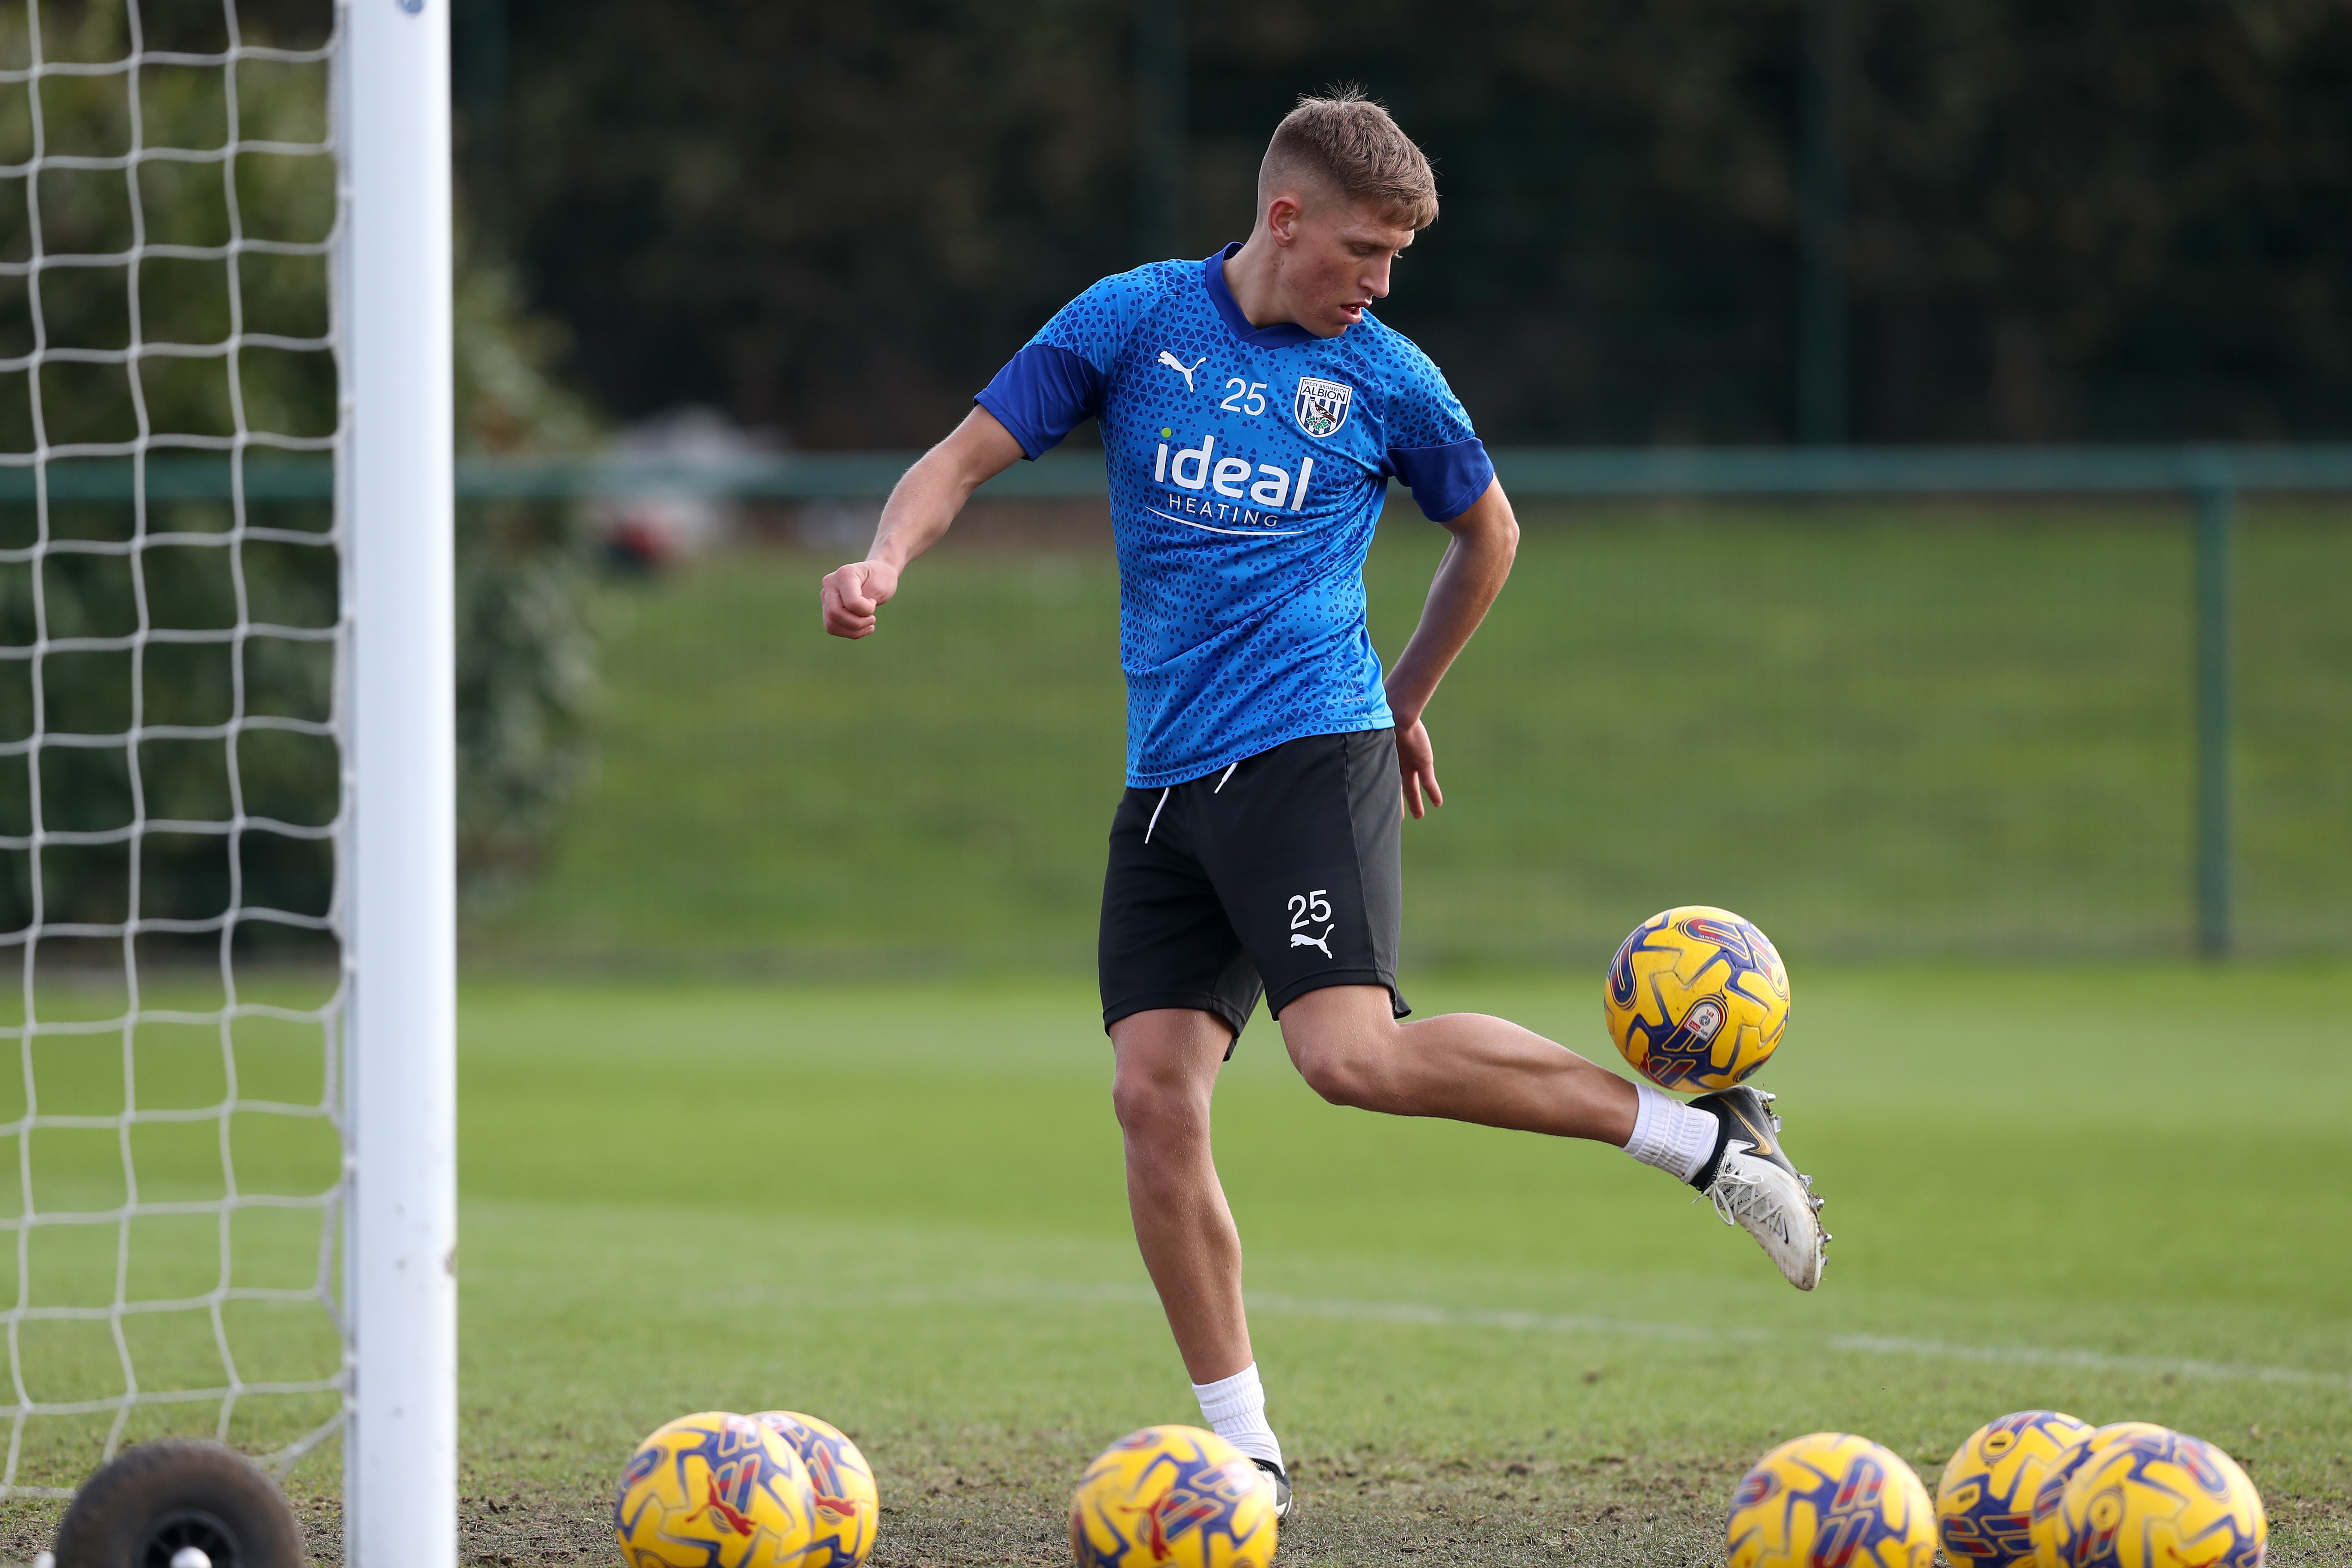 Callum Marshall flicking a ball up during a training session